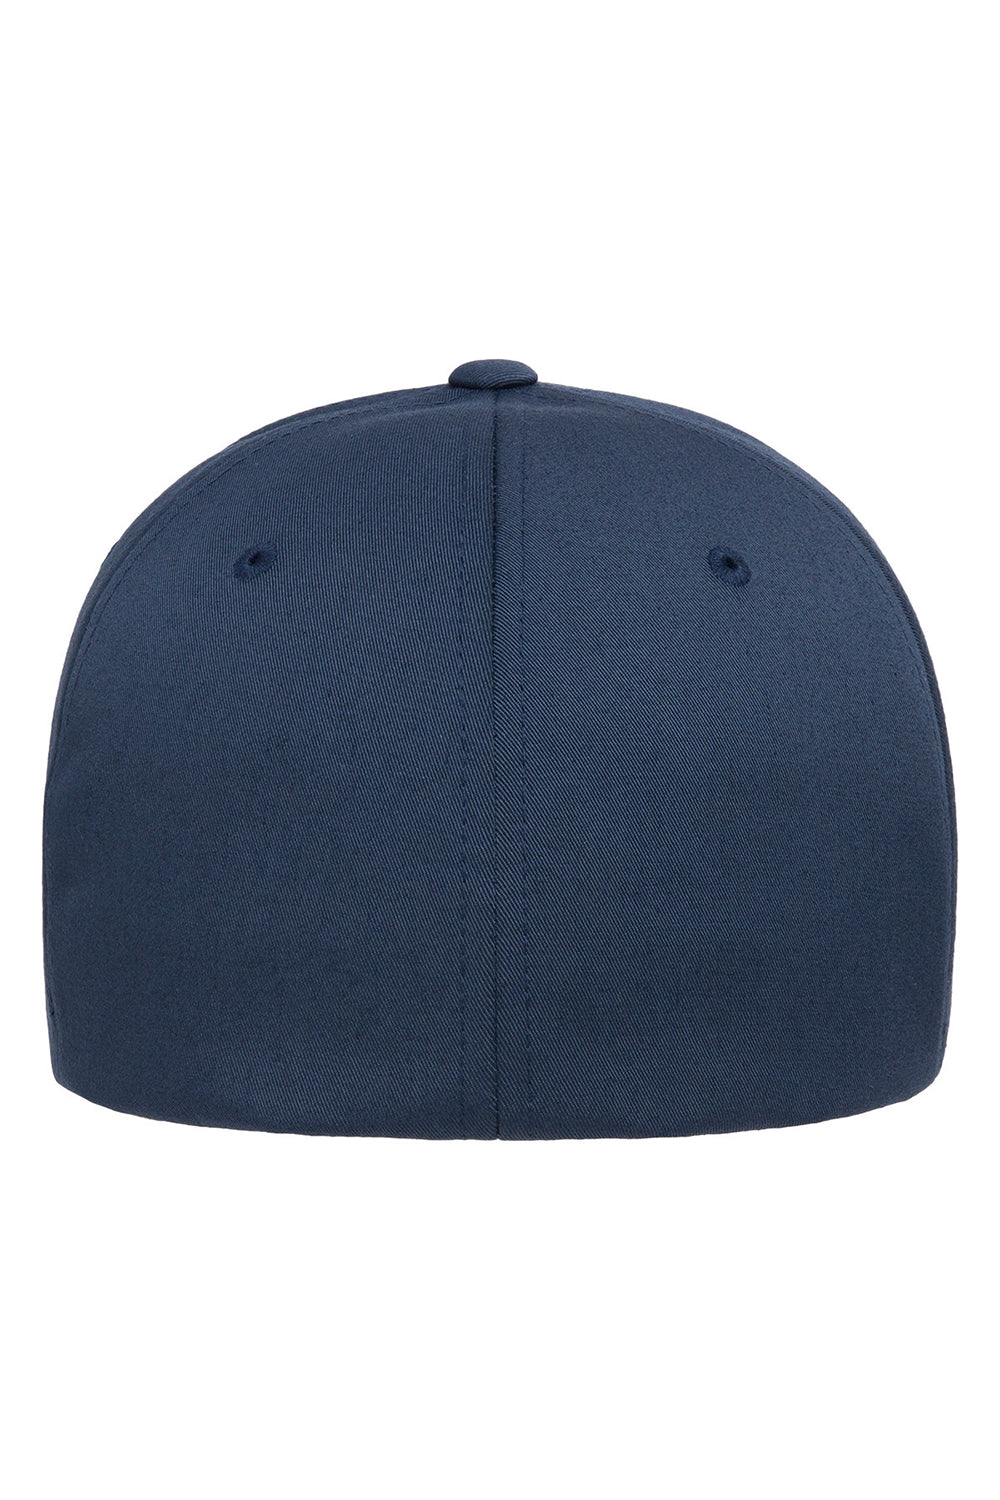 Yupoong 6277R Mens Recycled Hat Navy Blue Back